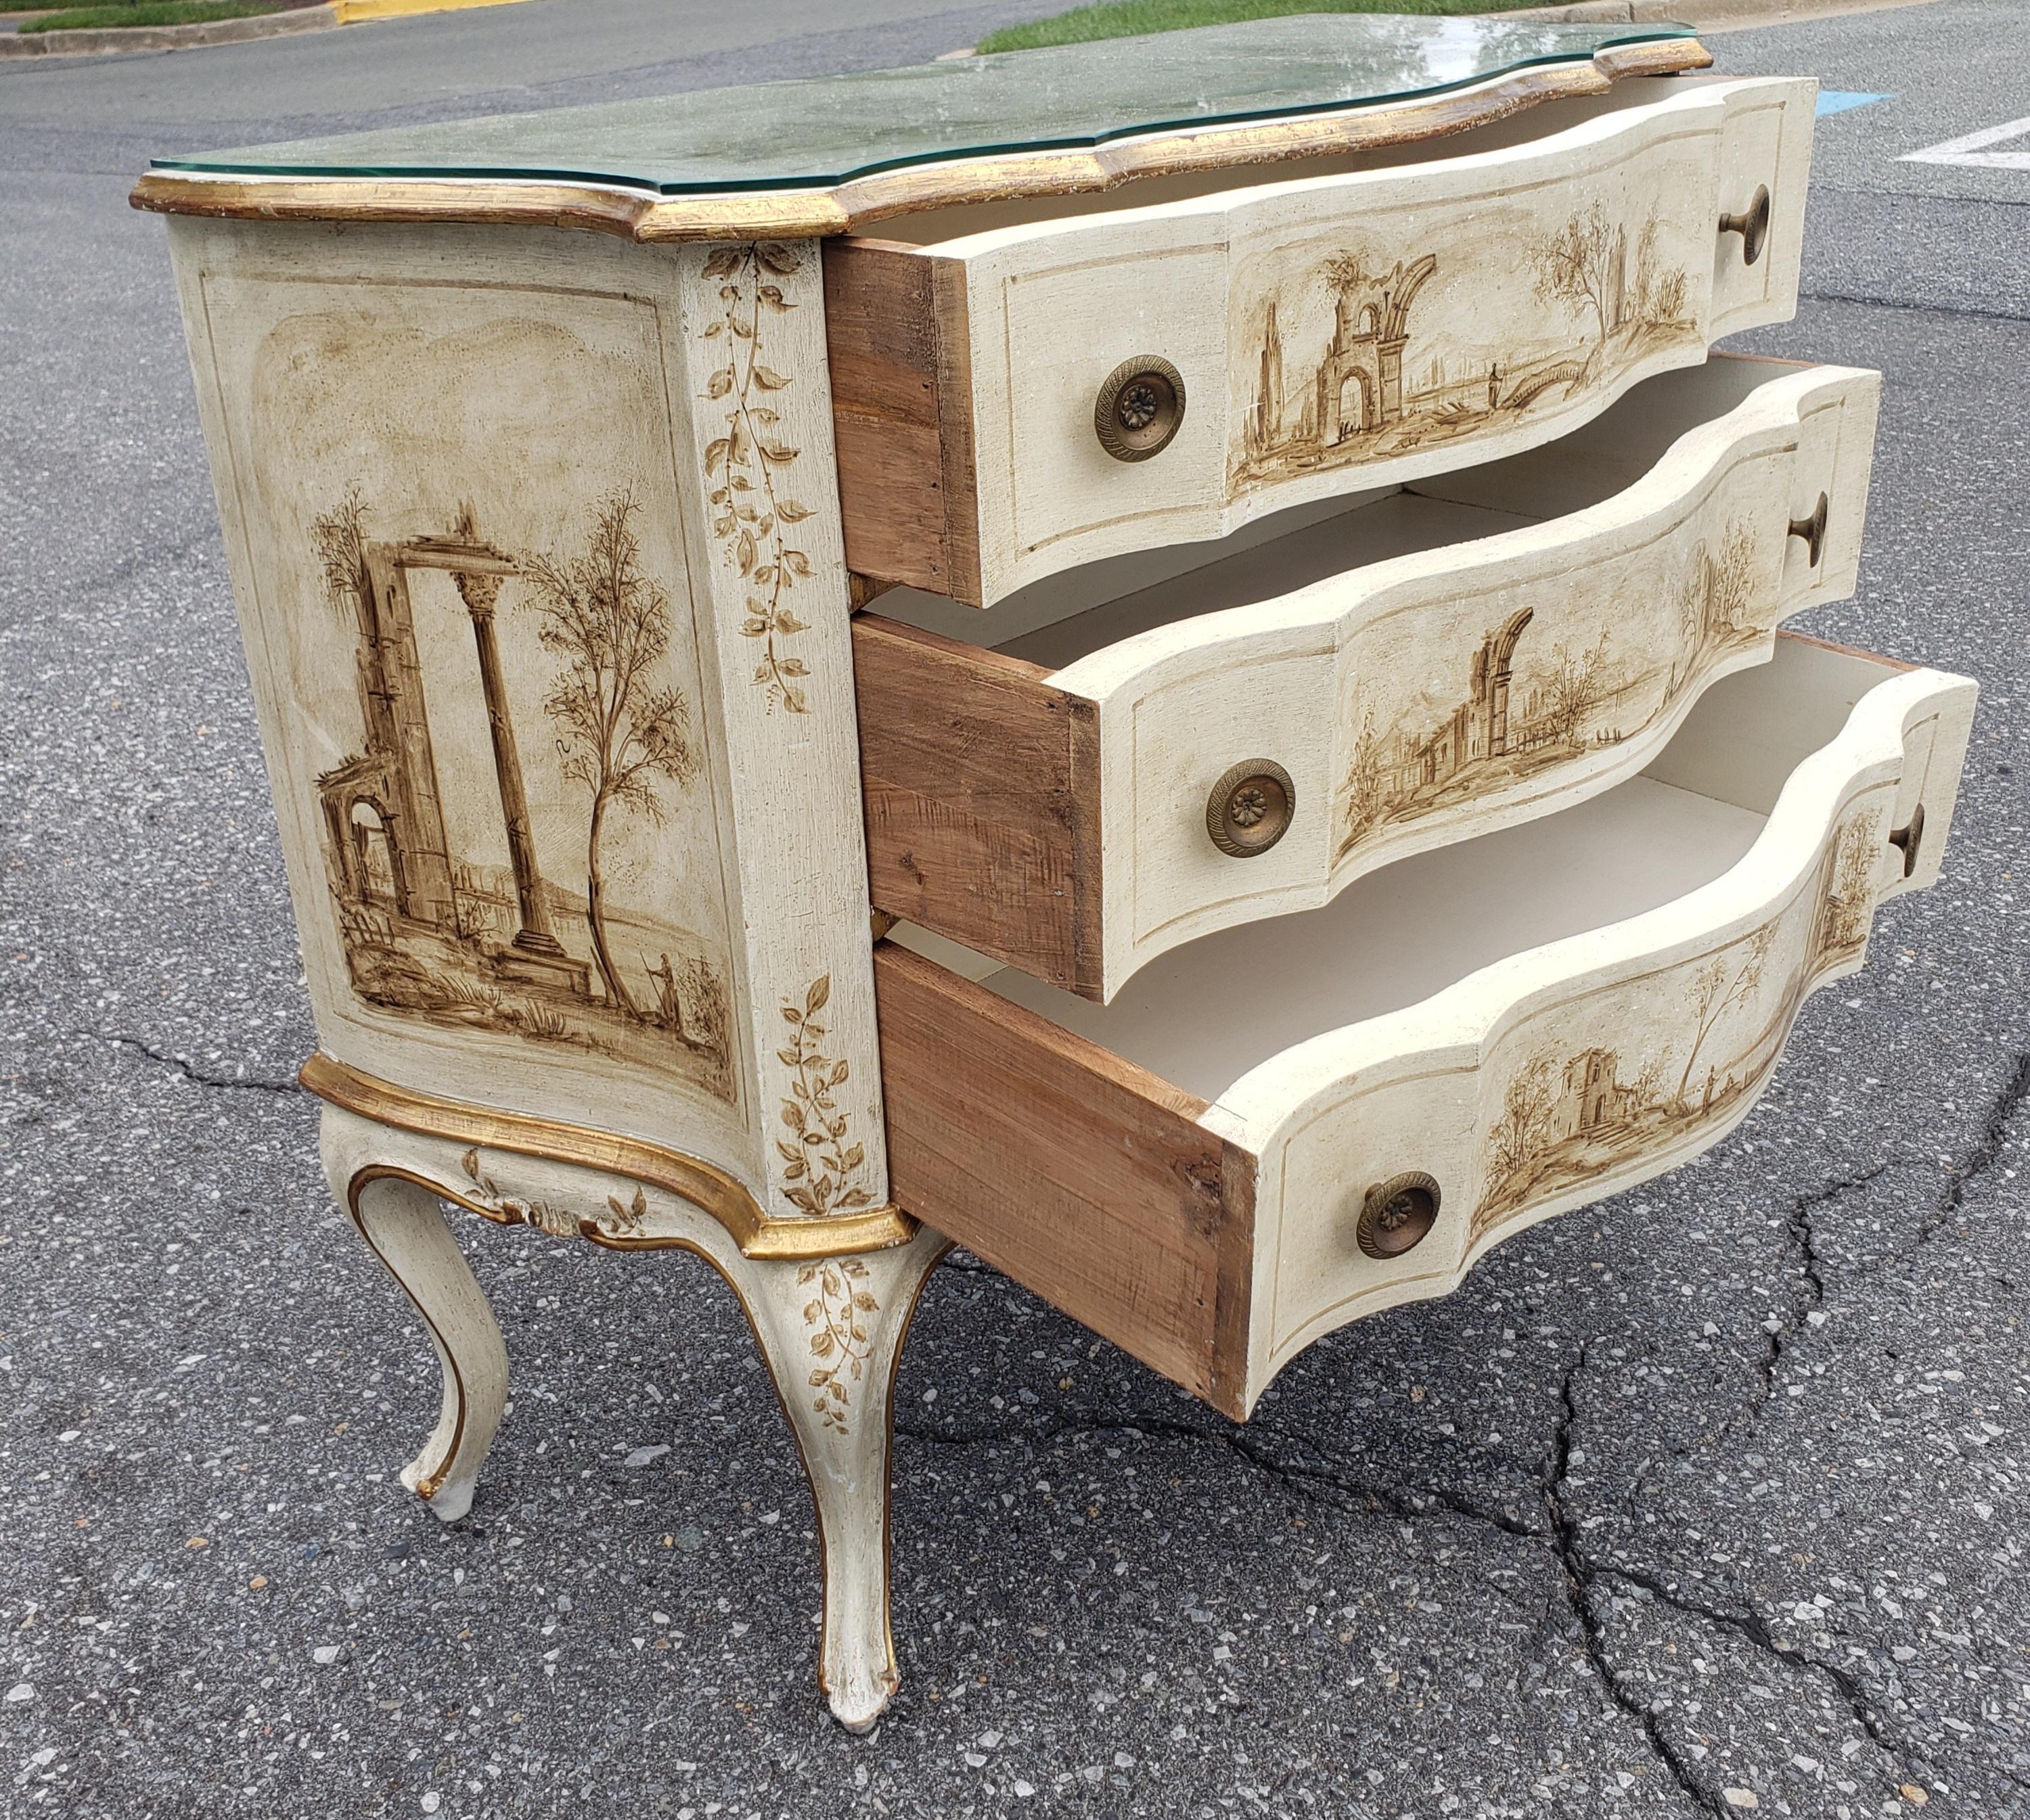 Early 20th C. Venetian Hand-Painted and Decorated Partial Gilt Commode w/ Glass For Sale 2